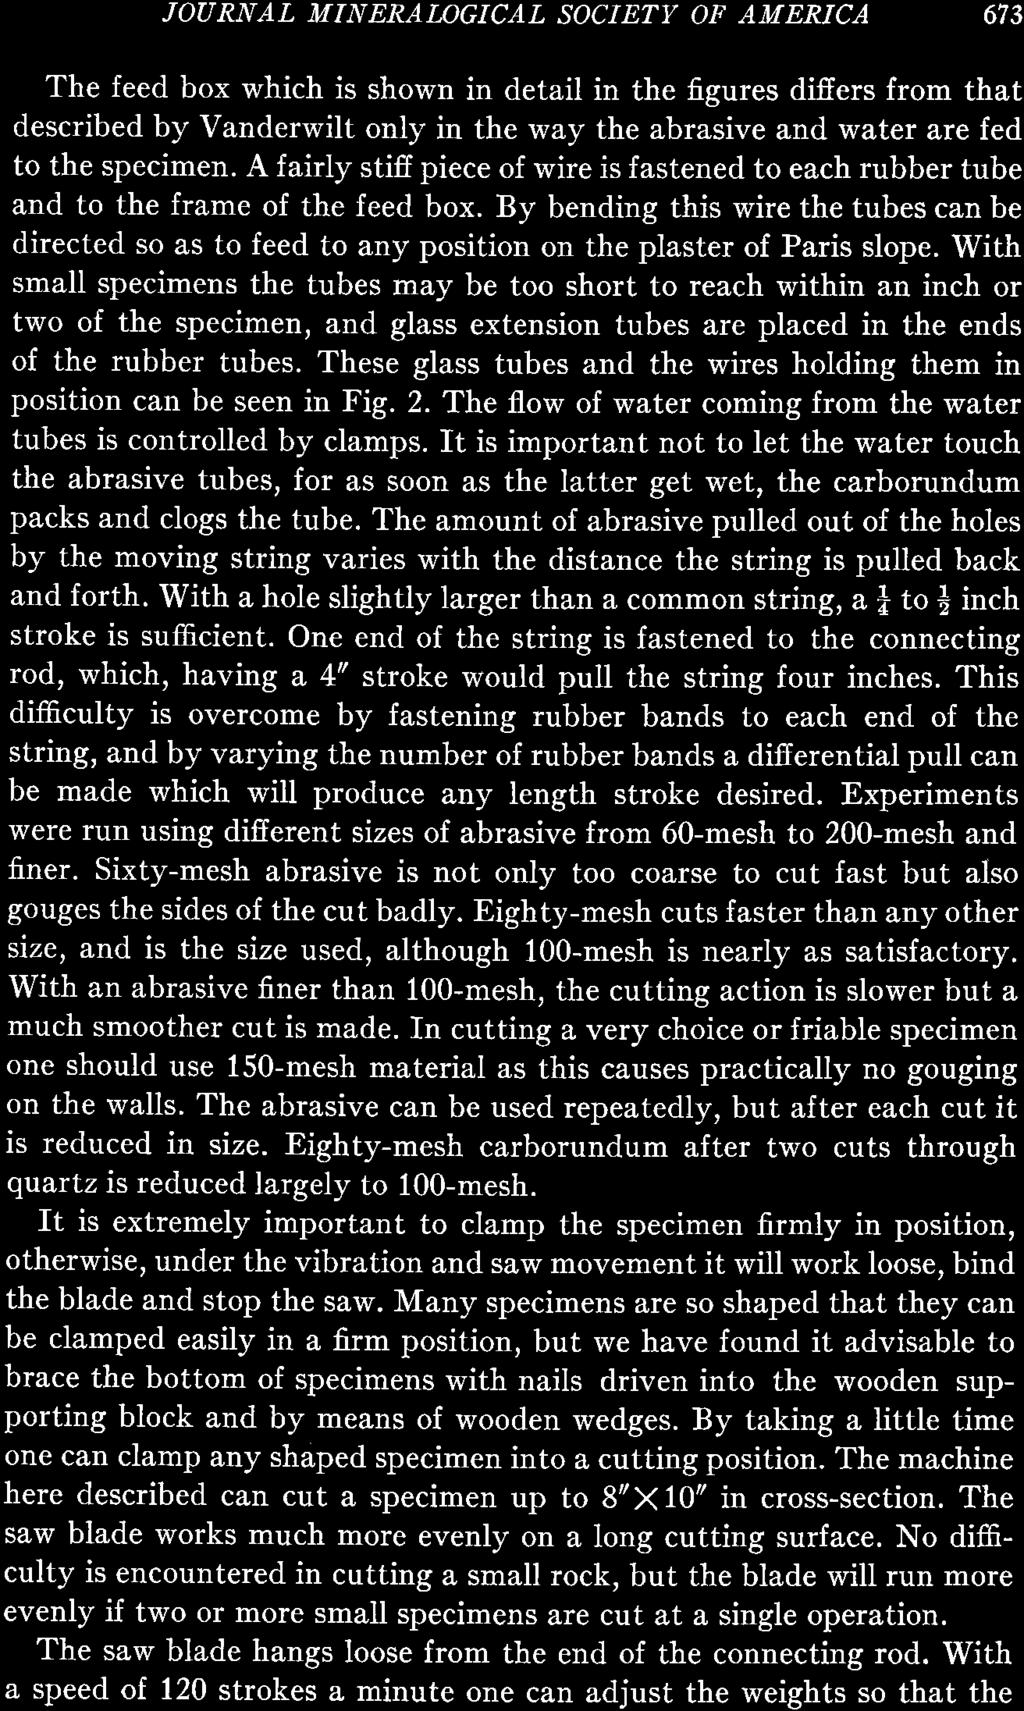 JOURNAL MINERAINGICAL SOCIETY OF AMERICA 673 The feed box which is shown in detail in the figures difiers from that described by Vanderwilt only in the way the abrasive and water are fed to the